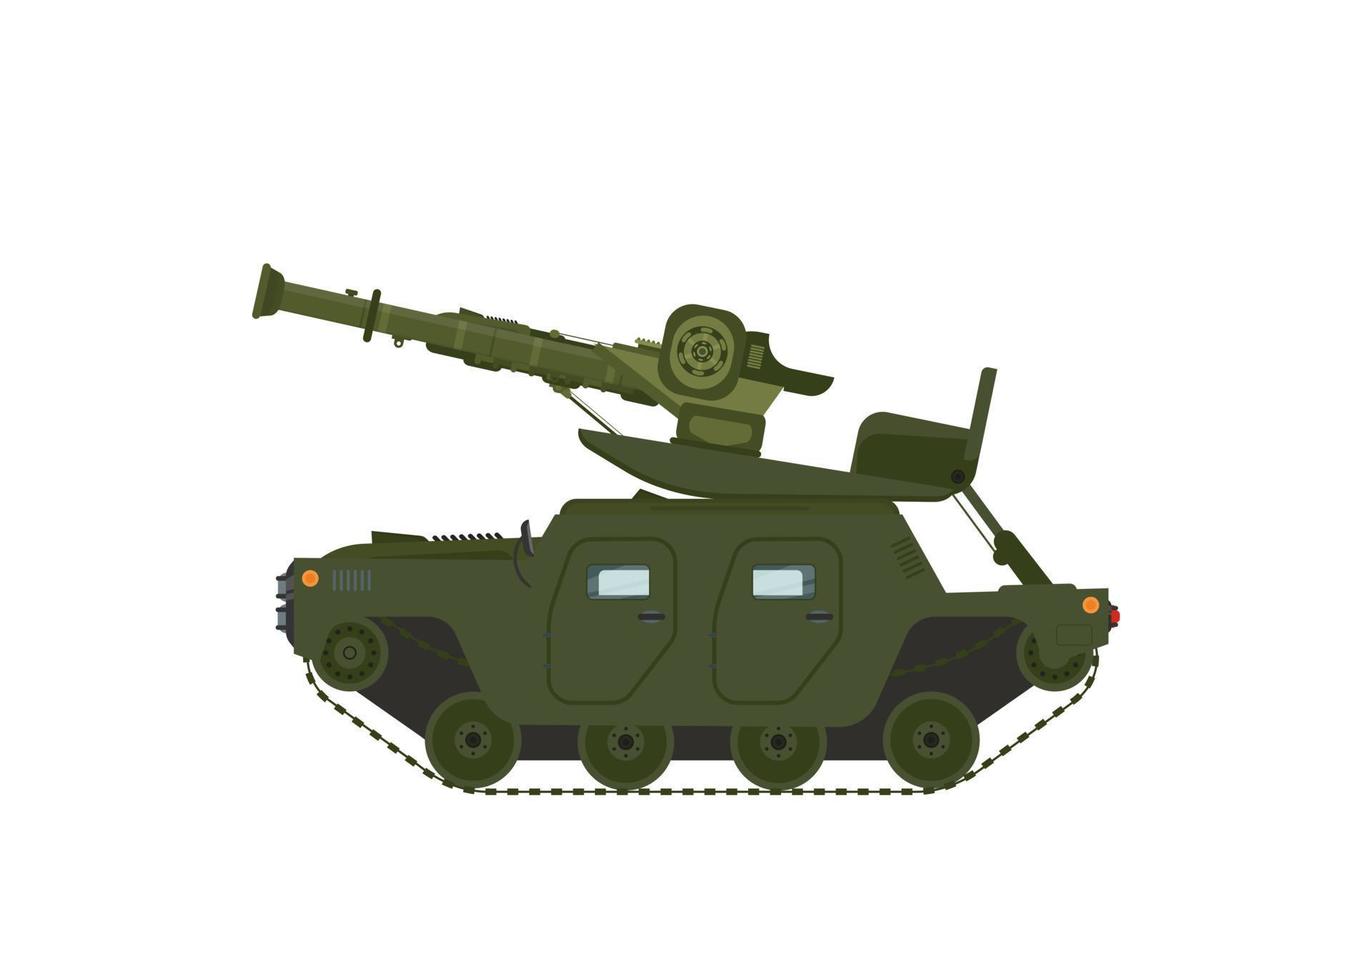 Self-propelled anti-tank missile system. Research, inspection, optical review, missiles, air attack. Equipment for the war. Vector illustration